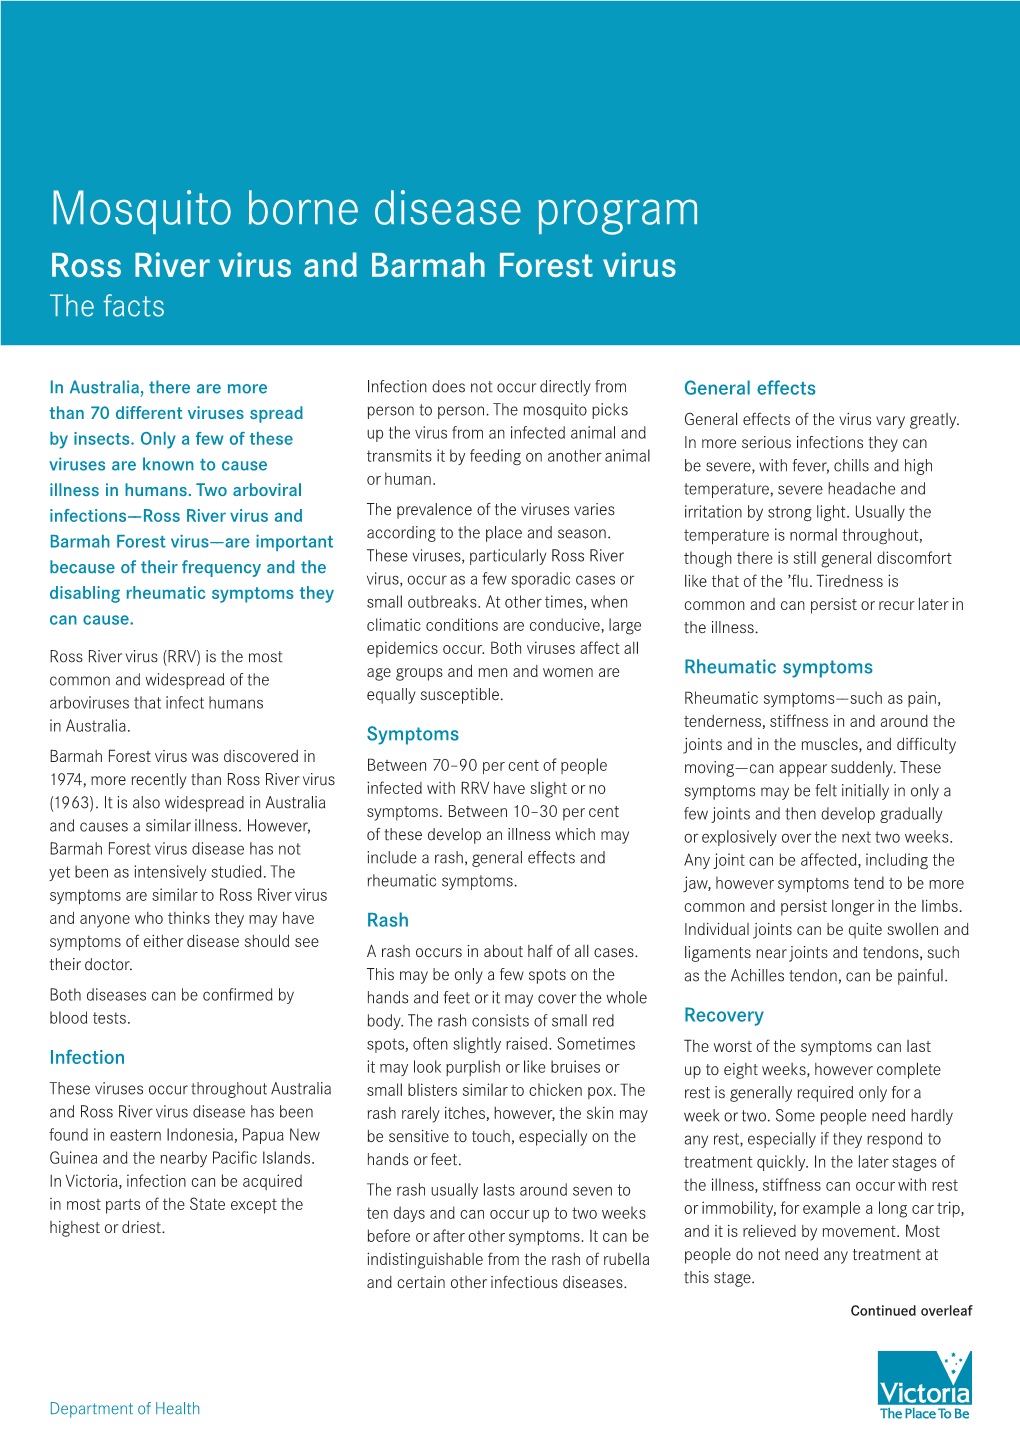 Mosquito Borne Disease Program Ross River Virus and Barmah Forest Virus the Facts